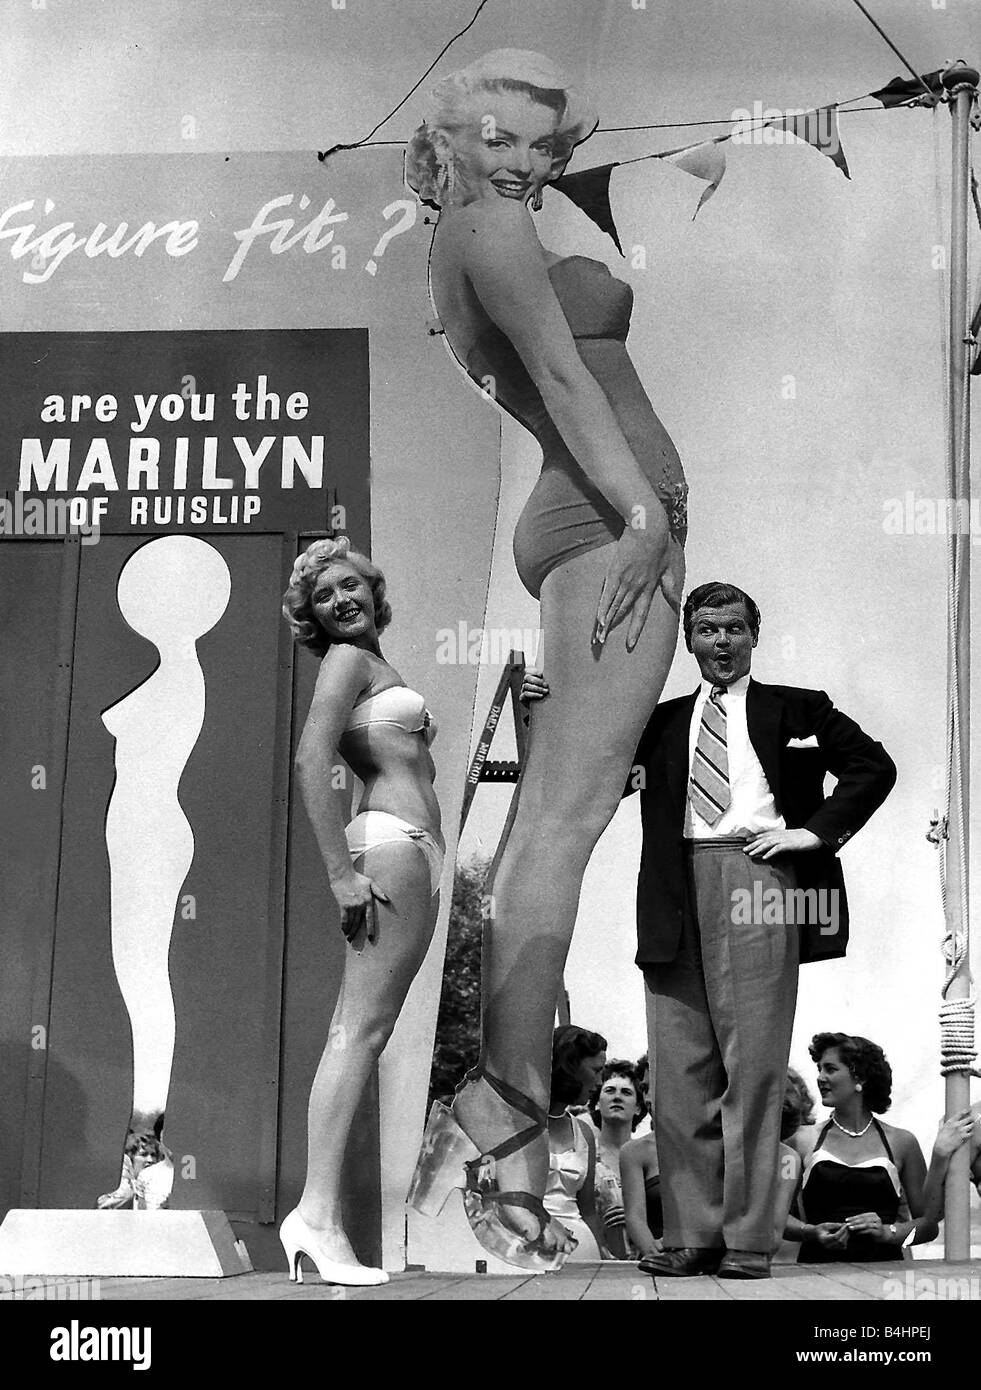 Benny Hill Actor Comedian At The Miss Marilyn Contest In Ruislip Stock Photo